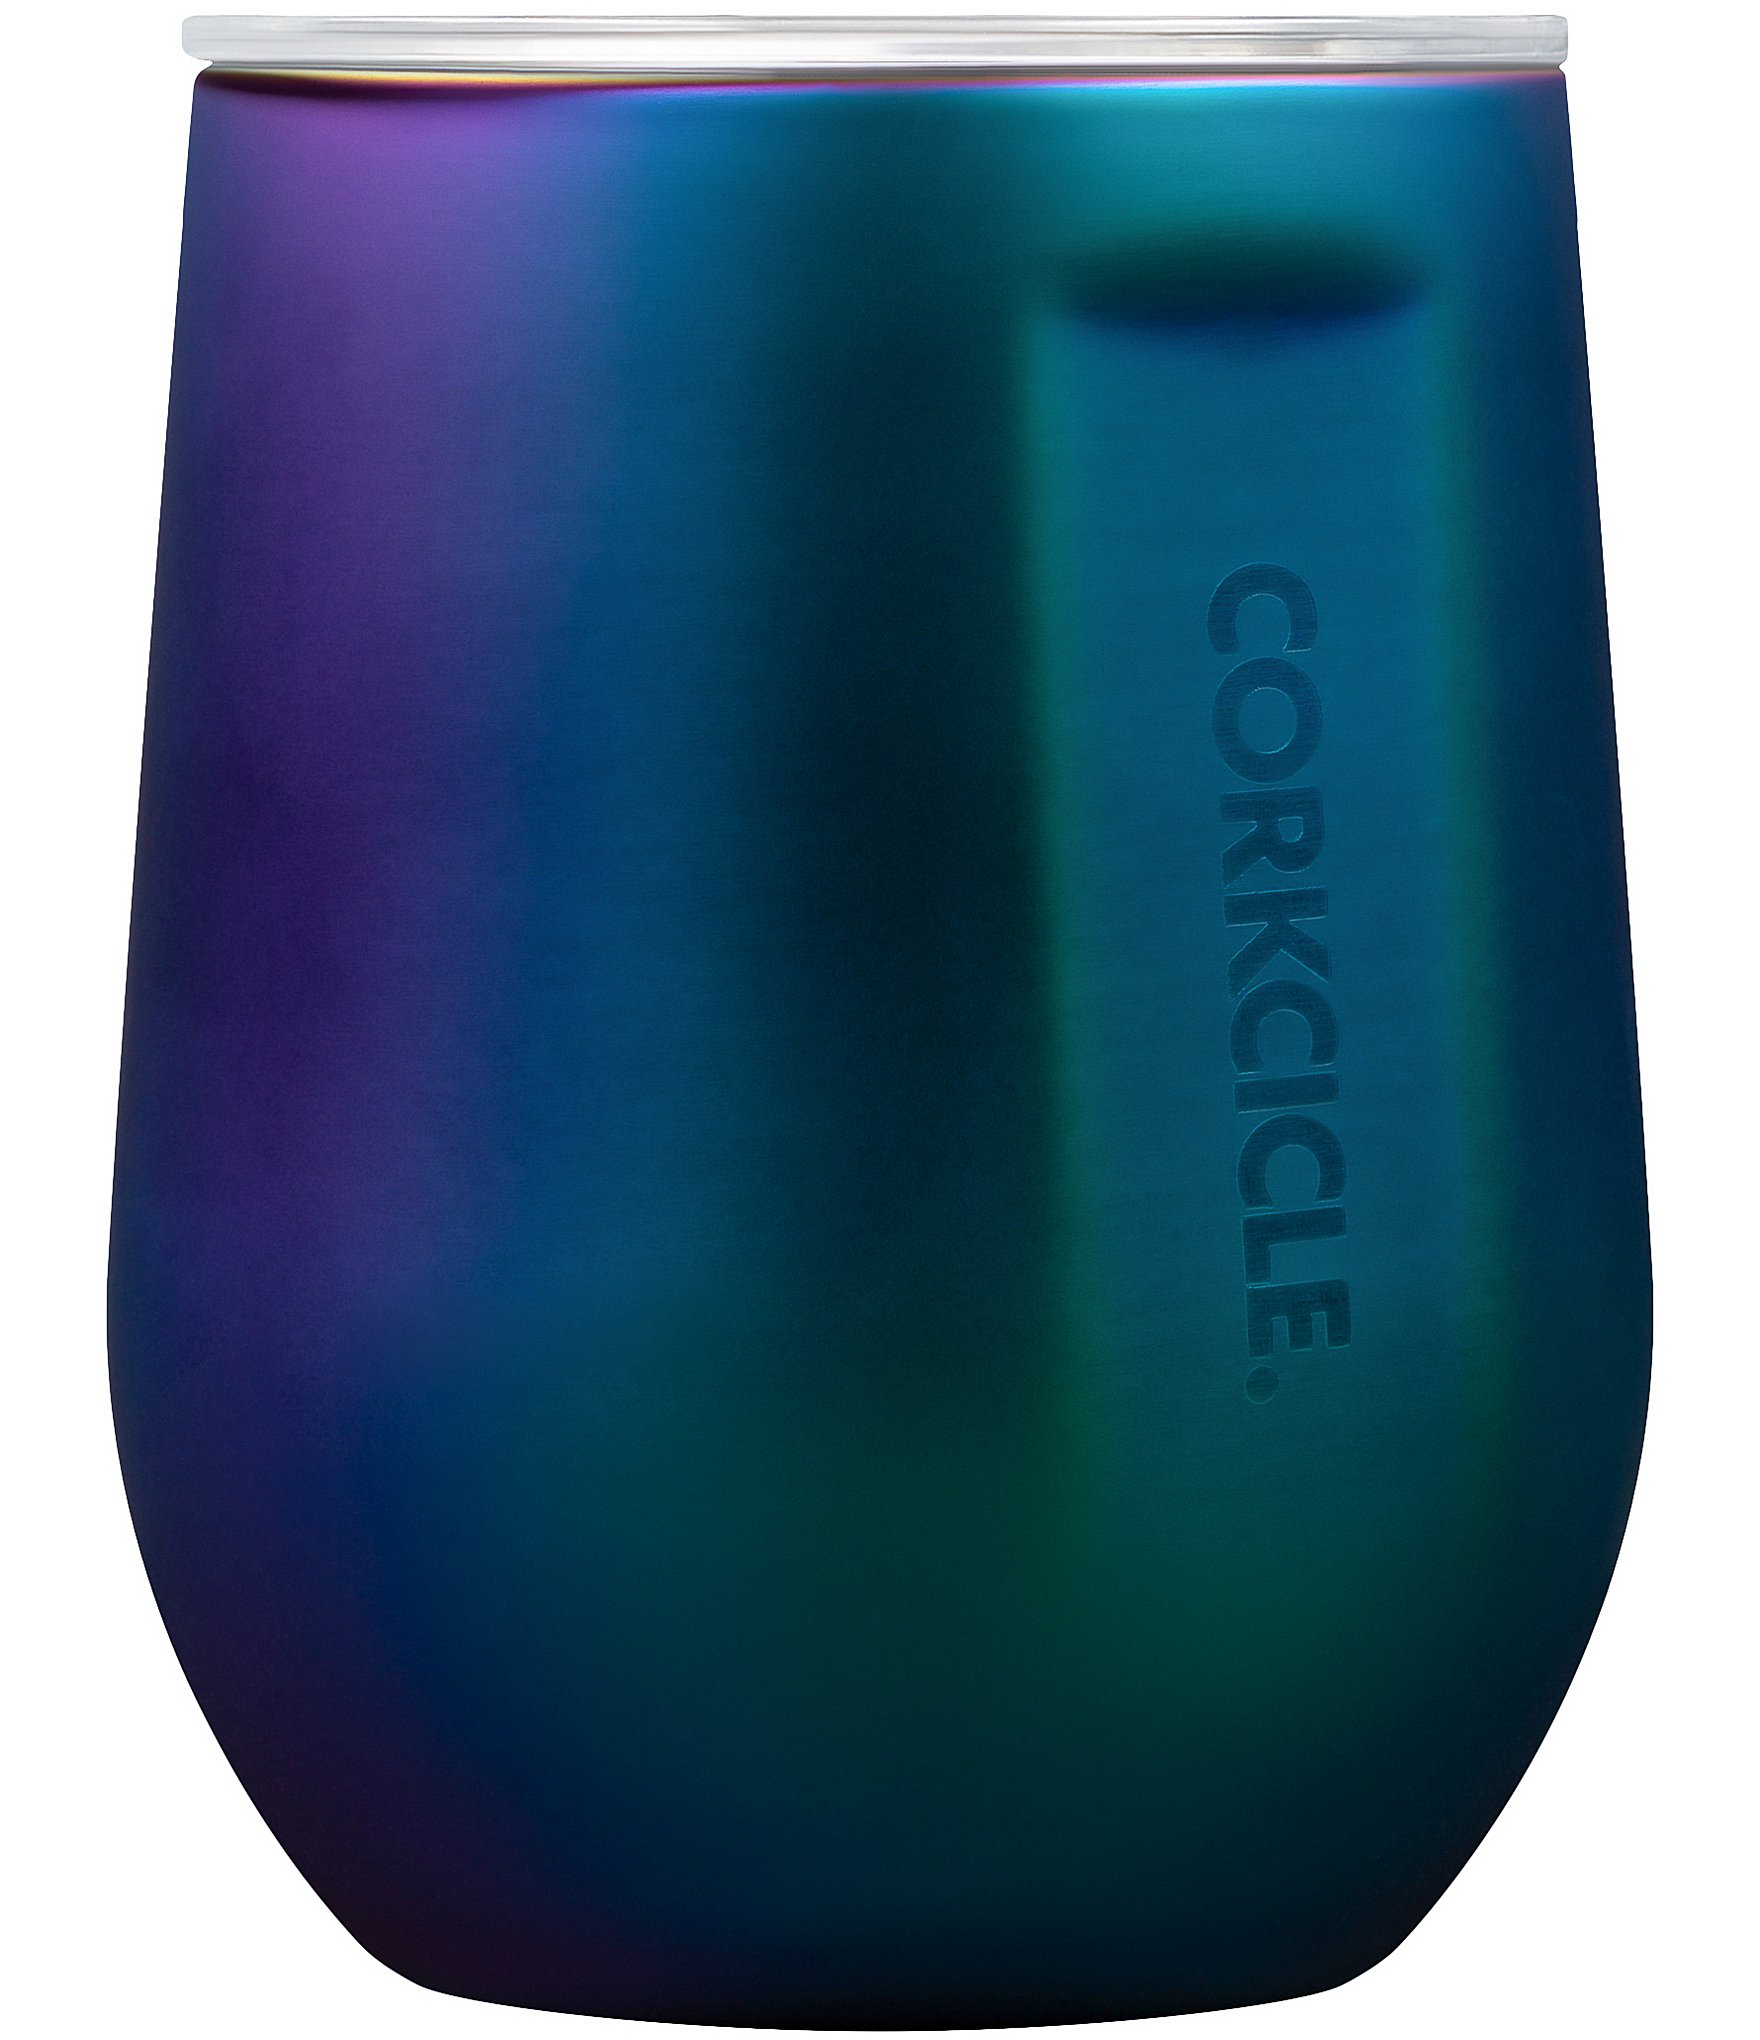 https://dimg.dillards.com/is/image/DillardsZoom/zoom/corkcicle-stainless-steel-triple-insulated-stainless-dragonfly-wine-cup/00000000_zi_857f6c26-6768-4817-a181-93ef568b0b2b.jpg